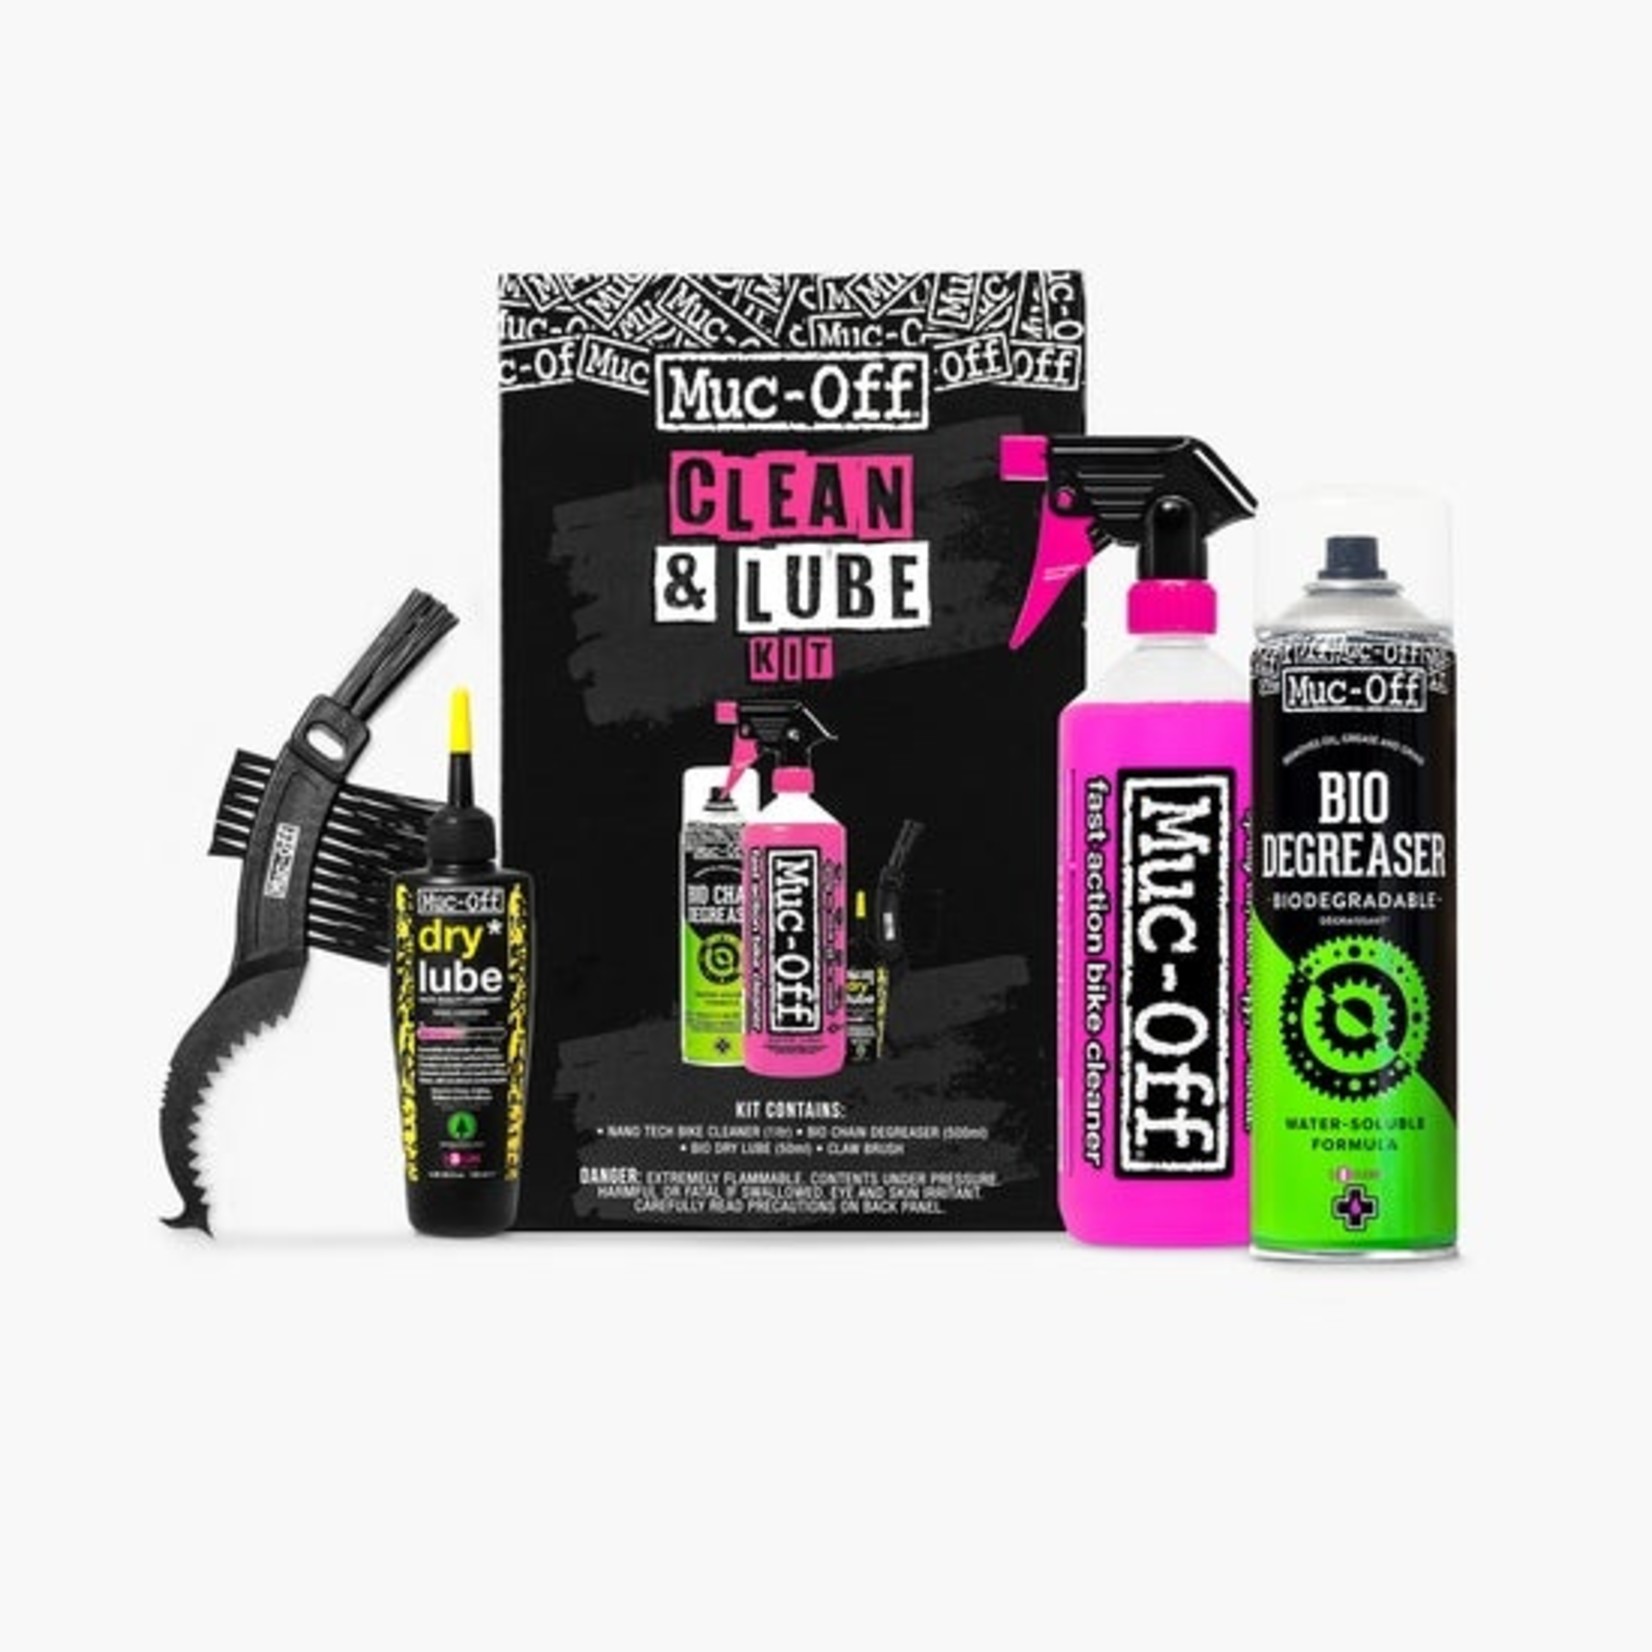 Muc-Off Muc-Off, Clean & Lube Kit, Kit, 1133CA (FR/ENG)